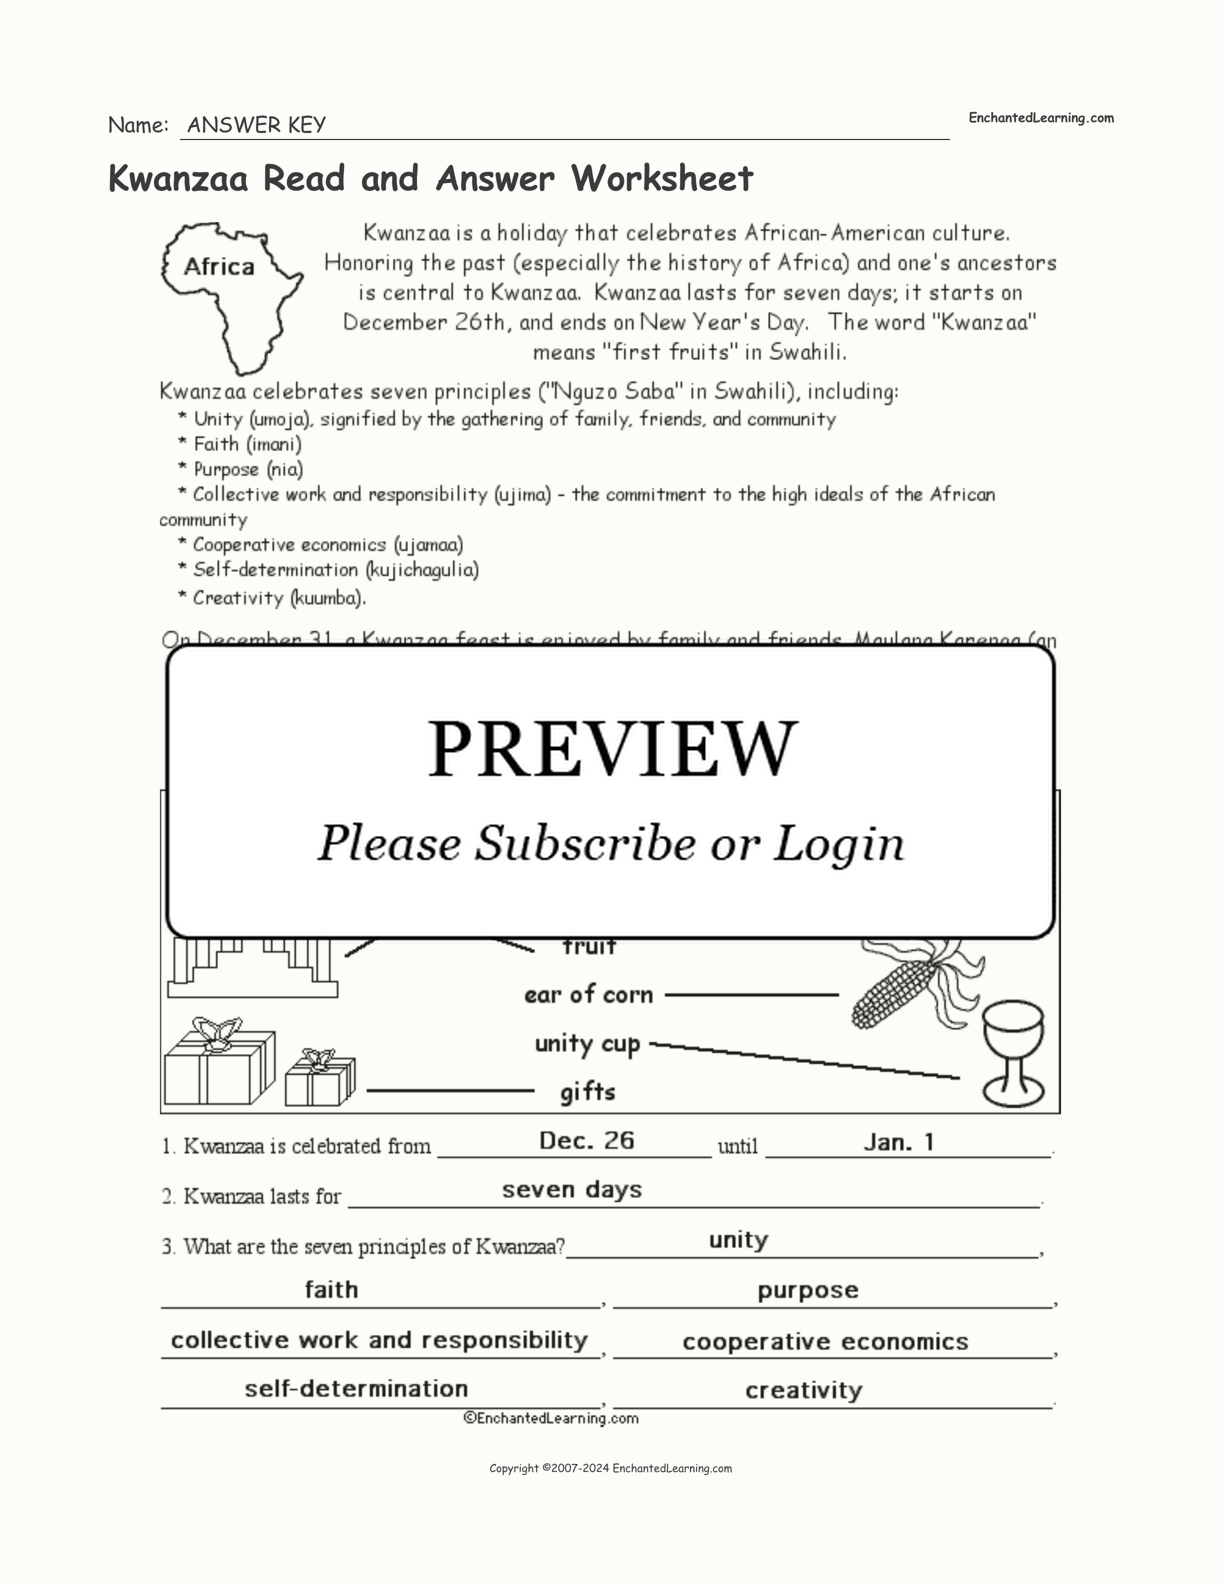 Kwanzaa Read and Answer Worksheet interactive worksheet page 2